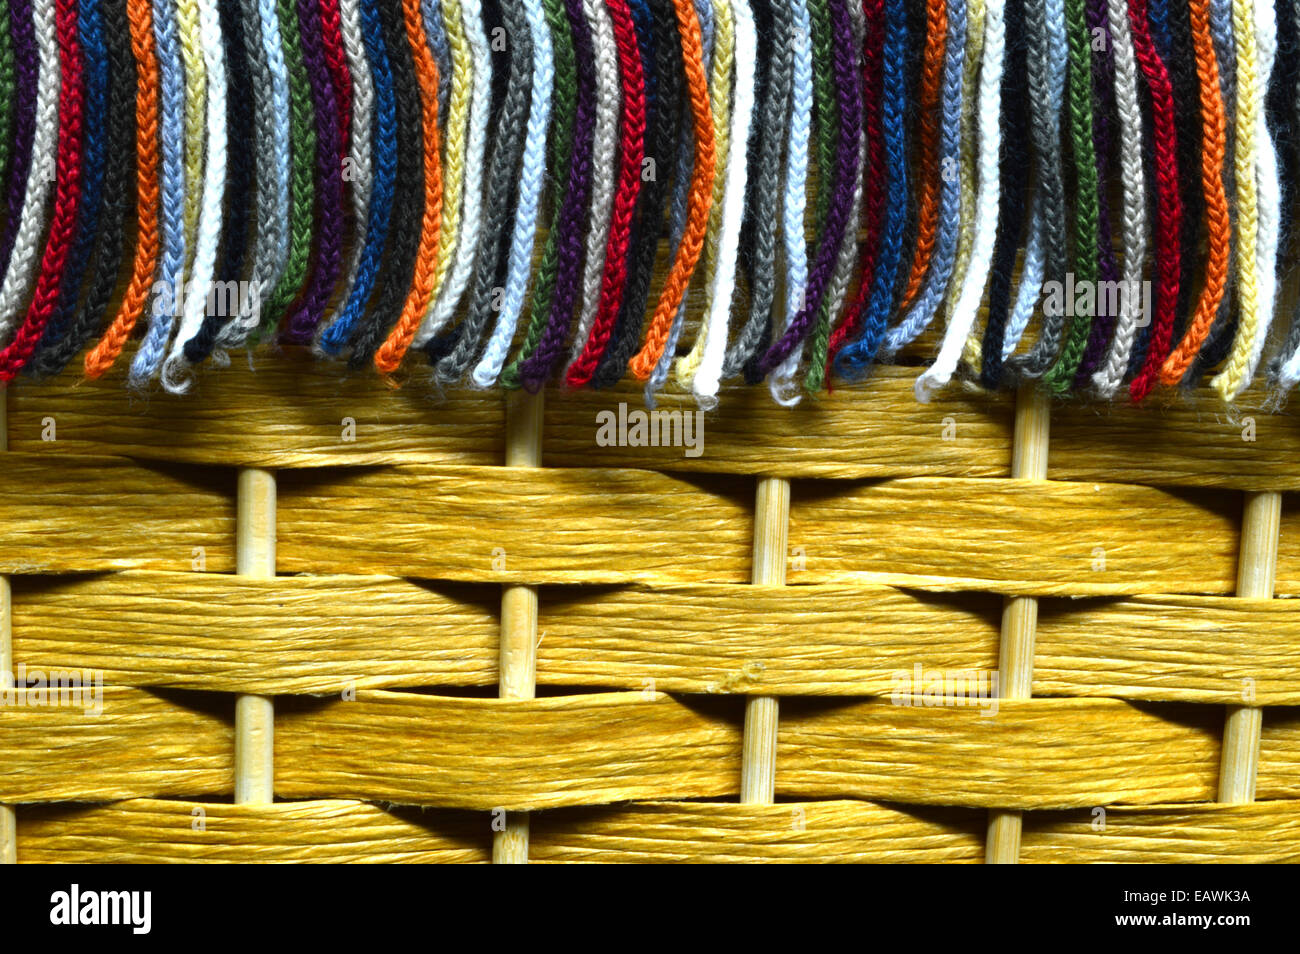 Strong coupled textures for a dramatic effect of wood and wool combined Stock Photo